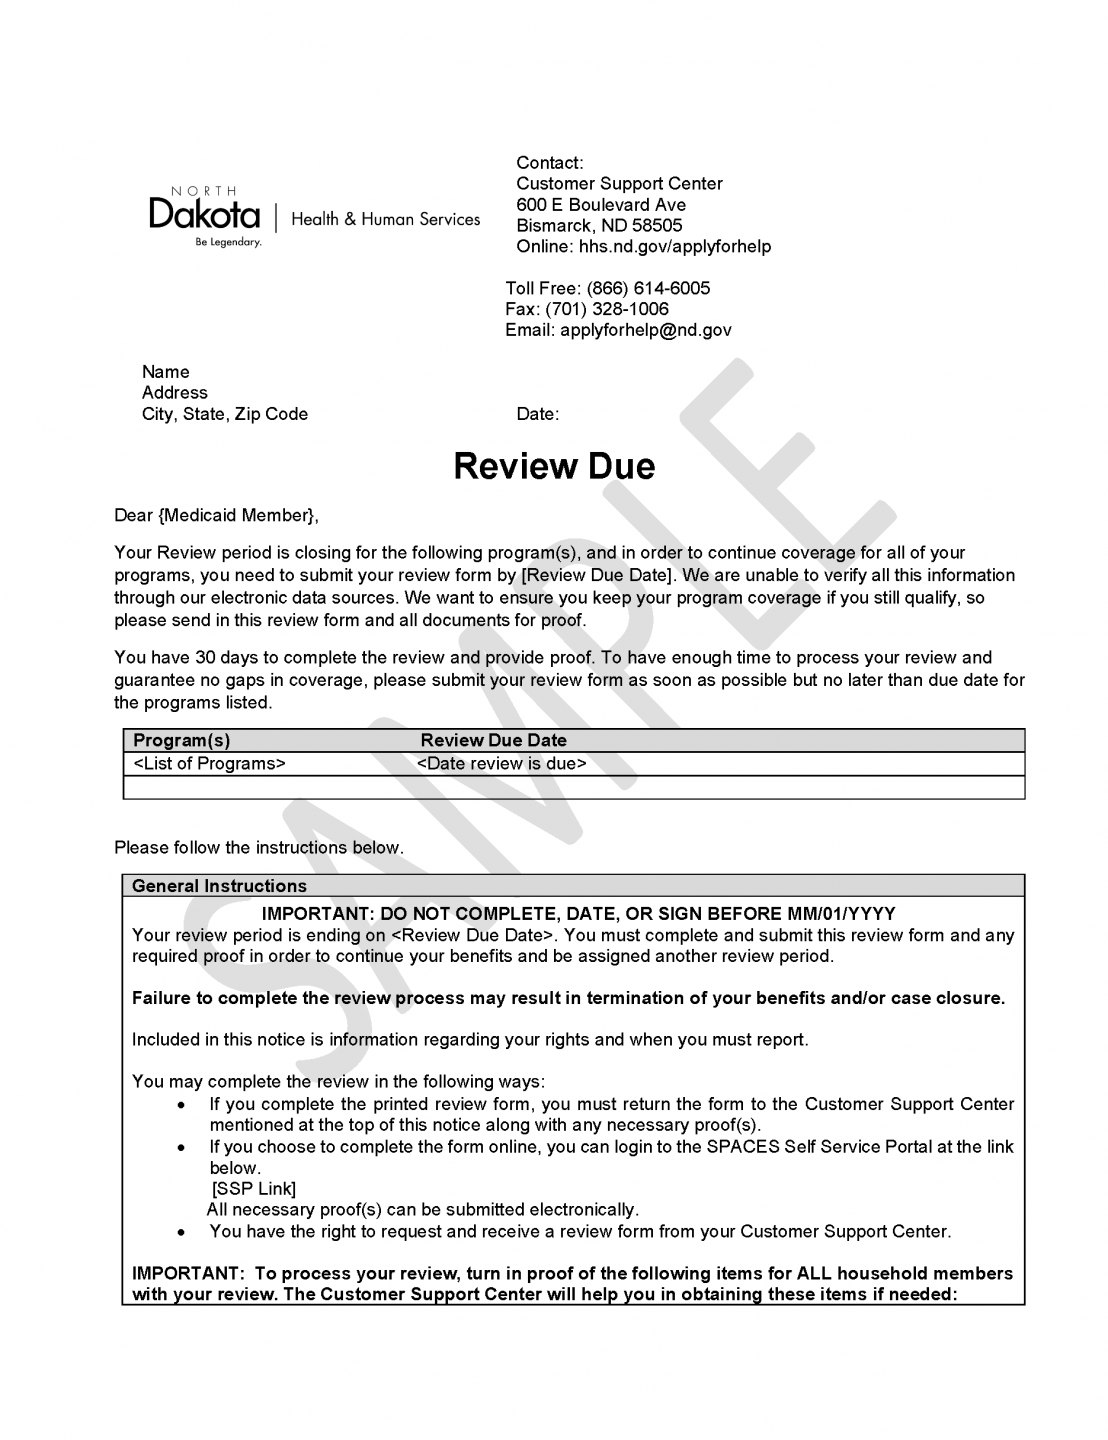 Sample review form